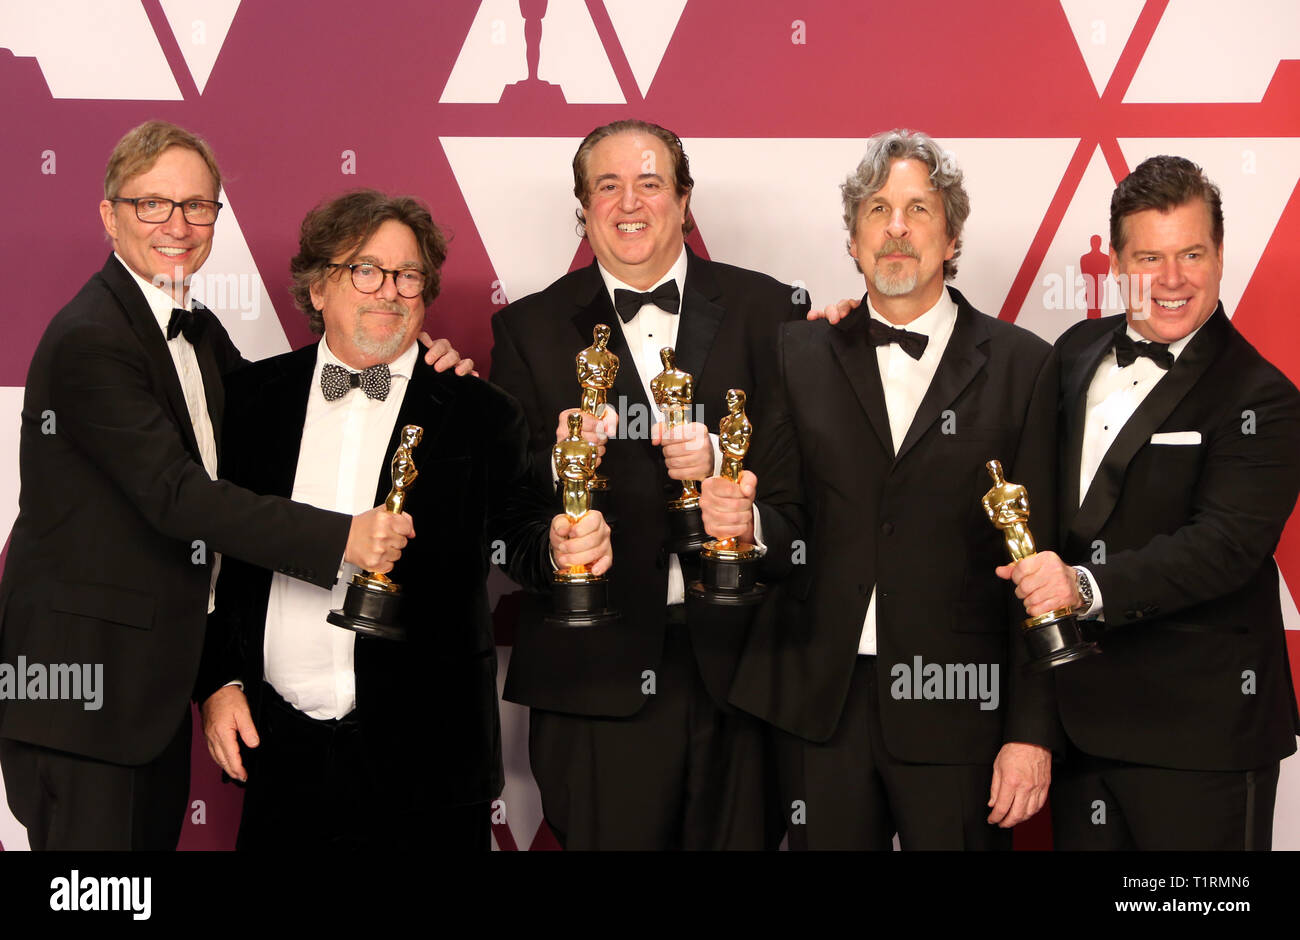 91st Academy Awards (Oscars 2019) held at the Dolby Theatre - Press Room  Featuring: Jim Burke, Charles B. Wessler, Nick Vallelonga, Peter Farrelly, Brian Currie Where: Hollywood, California, United States When: 24 Feb 2019 Credit: FayesVision/WENN.com Stock Photo